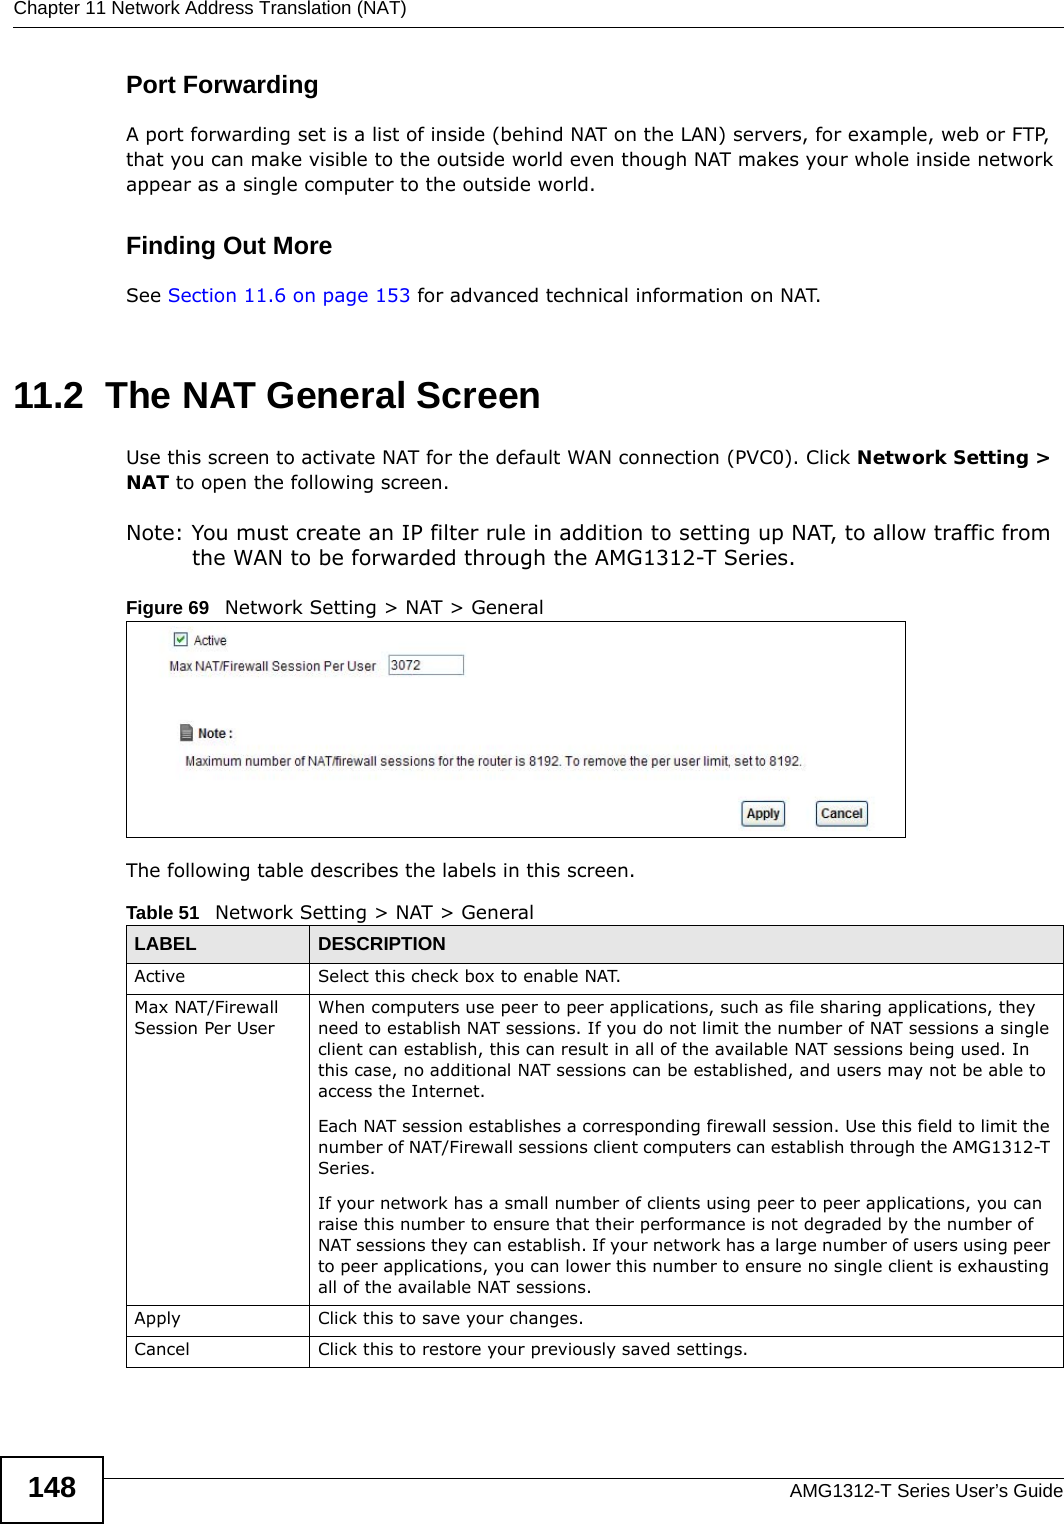 Chapter 11 Network Address Translation (NAT)AMG1312-T Series User’s Guide148Port ForwardingA port forwarding set is a list of inside (behind NAT on the LAN) servers, for example, web or FTP, that you can make visible to the outside world even though NAT makes your whole inside network appear as a single computer to the outside world.Finding Out MoreSee Section 11.6 on page 153 for advanced technical information on NAT.11.2  The NAT General ScreenUse this screen to activate NAT for the default WAN connection (PVC0). Click Network Setting &gt; NAT to open the following screen.Note: You must create an IP filter rule in addition to setting up NAT, to allow traffic from the WAN to be forwarded through the AMG1312-T Series.Figure 69   Network Setting &gt; NAT &gt; GeneralThe following table describes the labels in this screen.Table 51   Network Setting &gt; NAT &gt; GeneralLABEL DESCRIPTIONActive Select this check box to enable NAT.Max NAT/Firewall Session Per UserWhen computers use peer to peer applications, such as file sharing applications, they need to establish NAT sessions. If you do not limit the number of NAT sessions a single client can establish, this can result in all of the available NAT sessions being used. In this case, no additional NAT sessions can be established, and users may not be able to access the Internet.Each NAT session establishes a corresponding firewall session. Use this field to limit the number of NAT/Firewall sessions client computers can establish through the AMG1312-T Series.If your network has a small number of clients using peer to peer applications, you can raise this number to ensure that their performance is not degraded by the number of NAT sessions they can establish. If your network has a large number of users using peer to peer applications, you can lower this number to ensure no single client is exhausting all of the available NAT sessions.Apply Click this to save your changes.Cancel Click this to restore your previously saved settings.